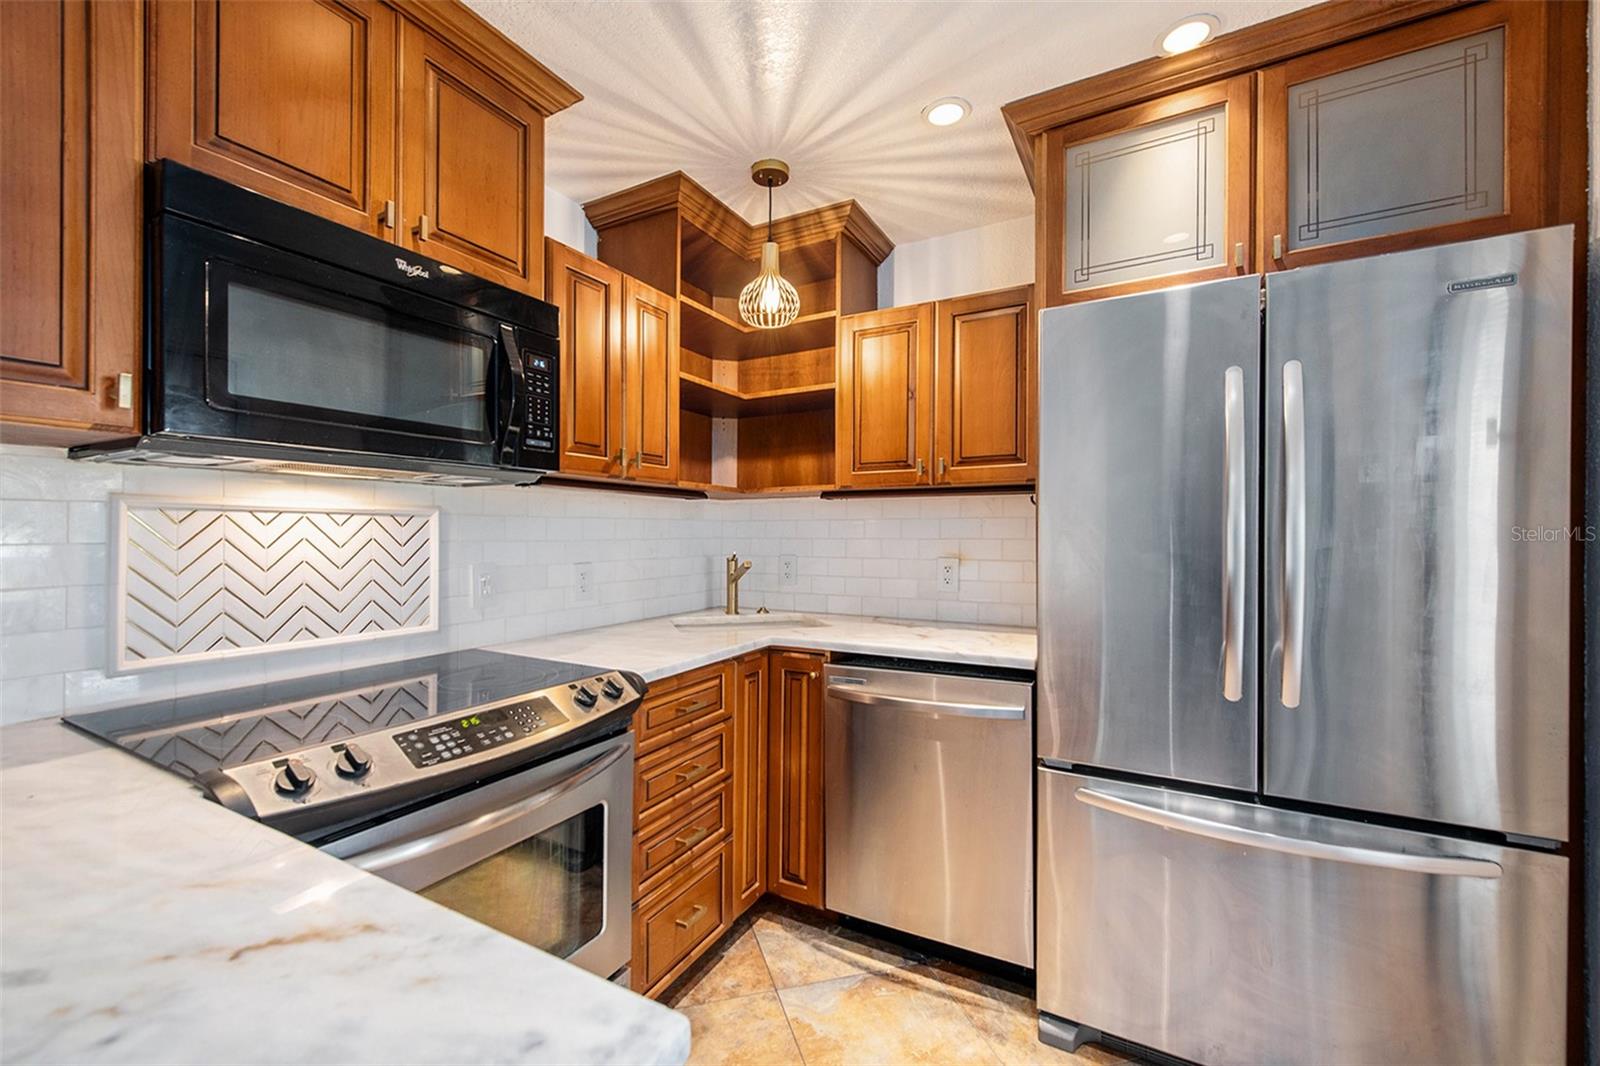 Beautifully updated kitchen with marble counter and a stainless steel appliance package